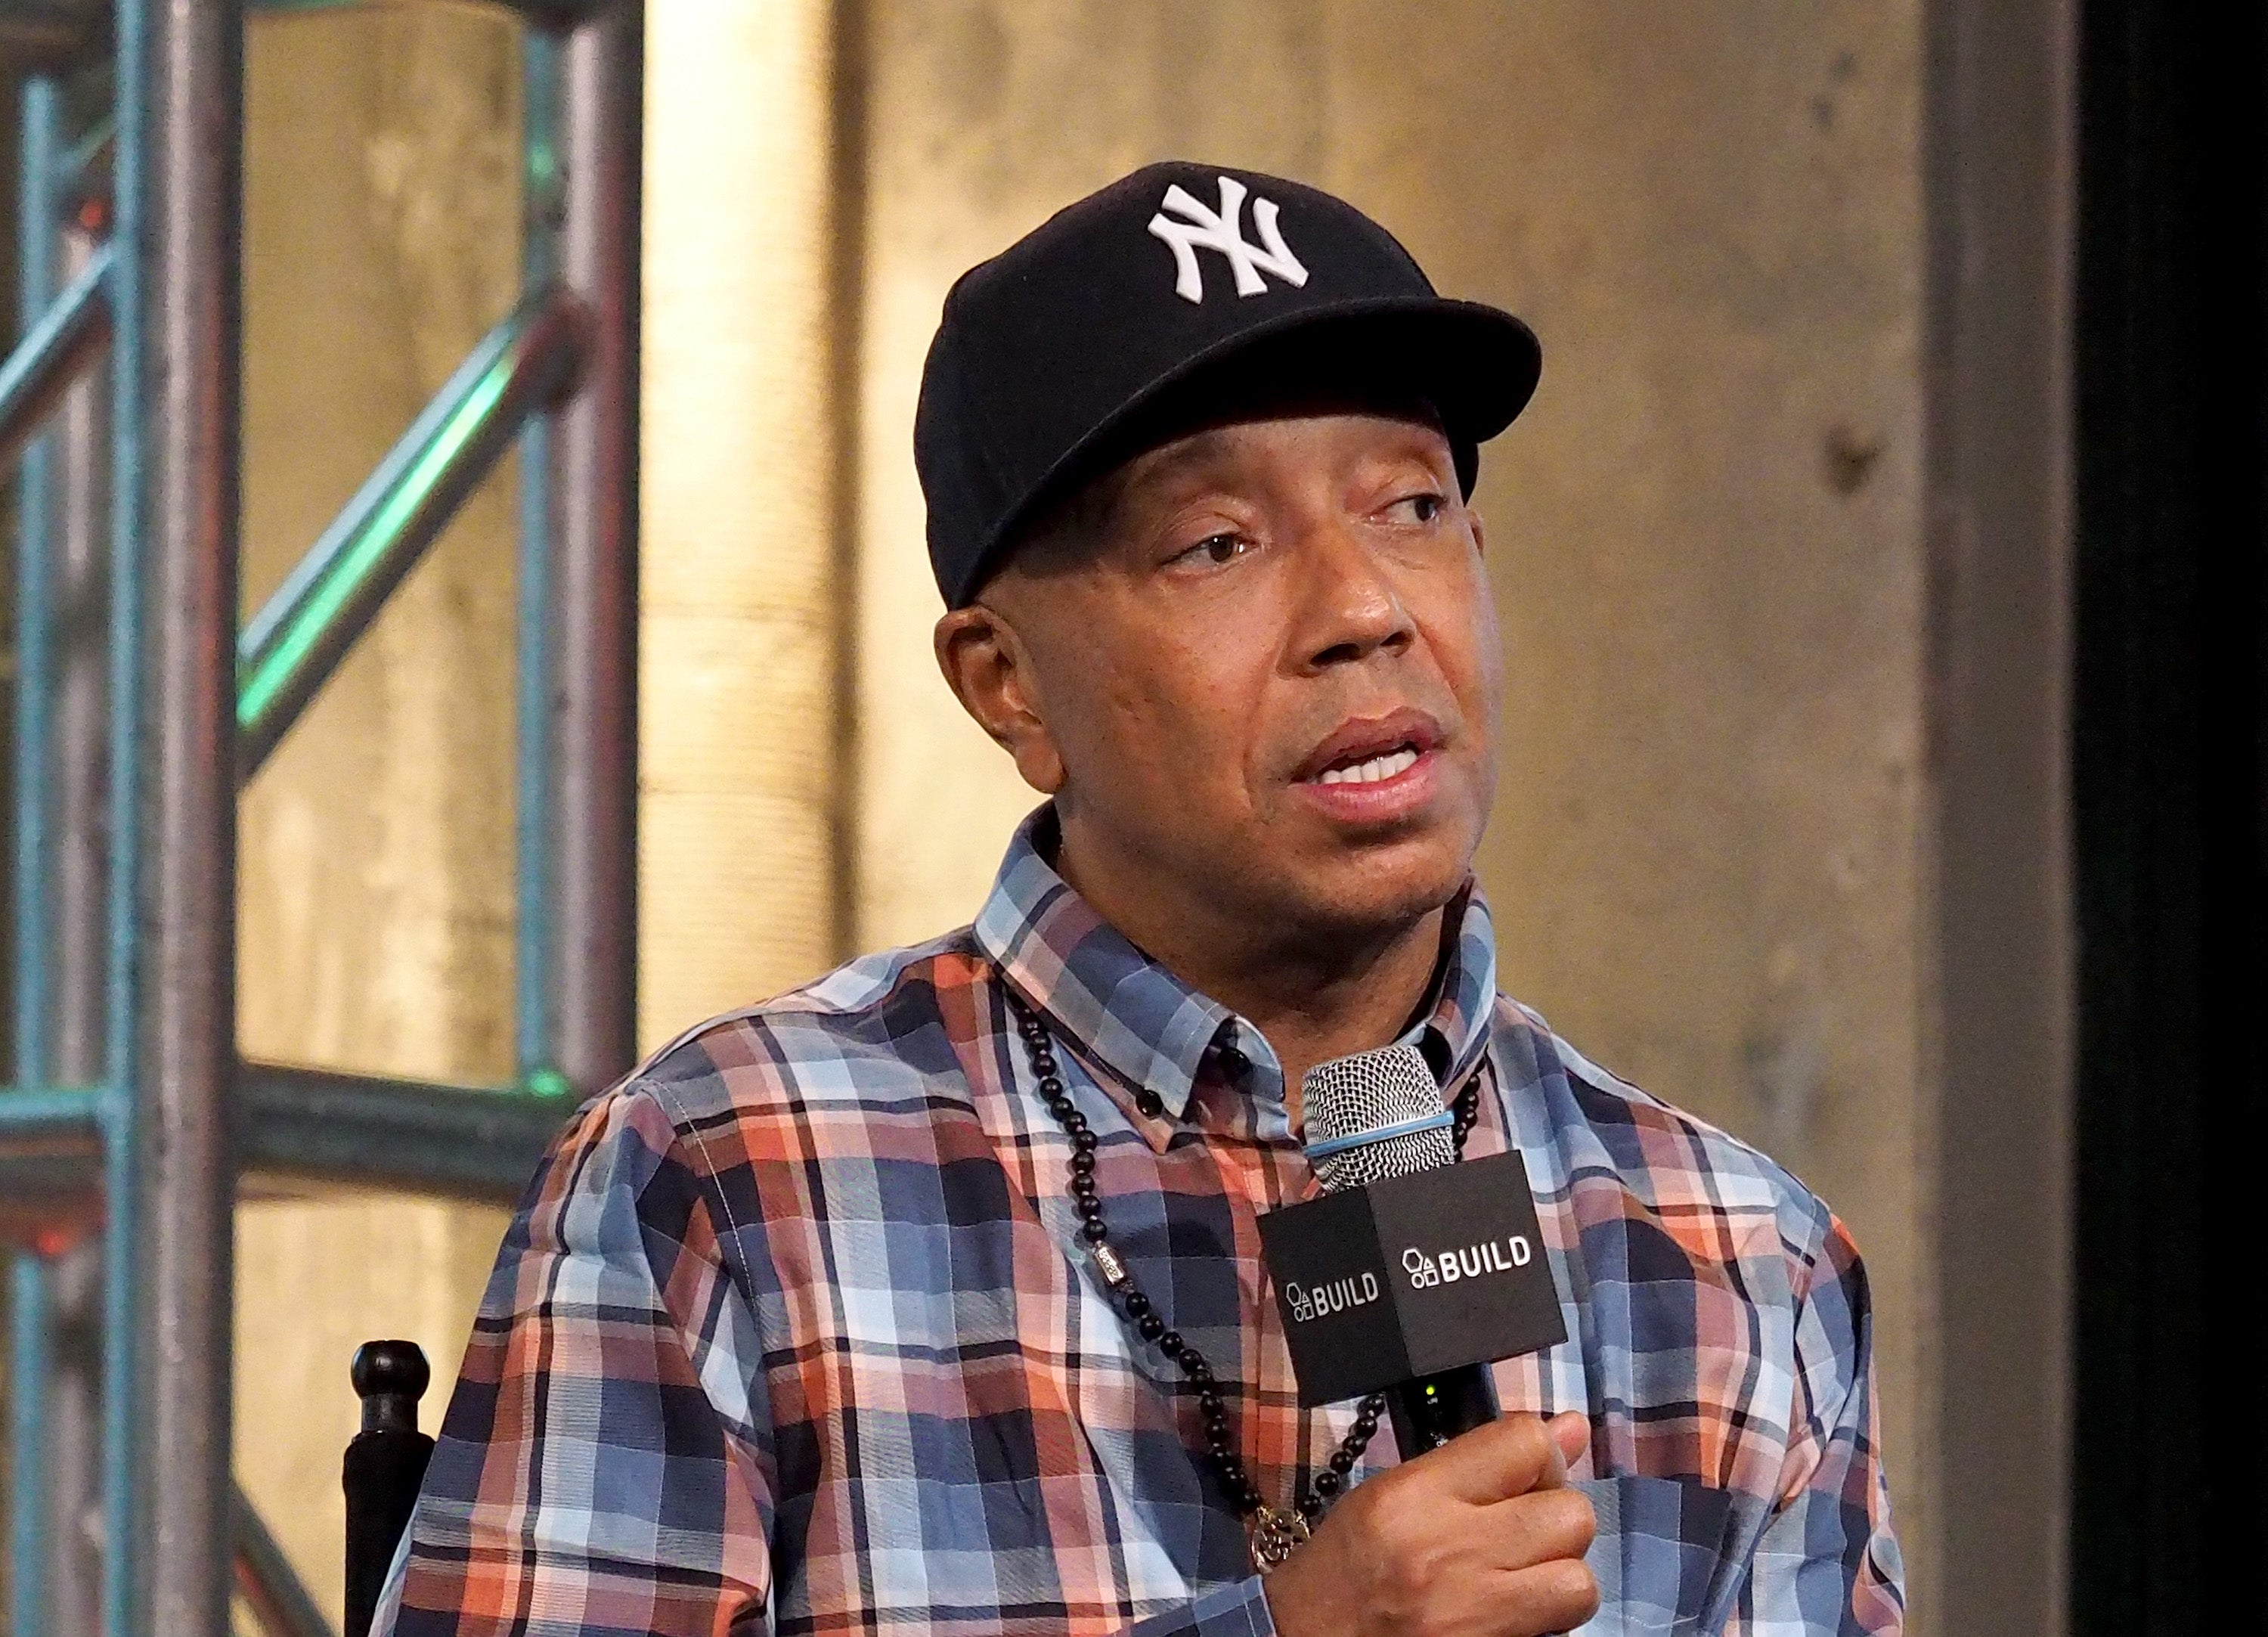 Russell Simmons On Trump's Anti-Semitic Remarks: 'He Said Some Things That Were Hurtful'
